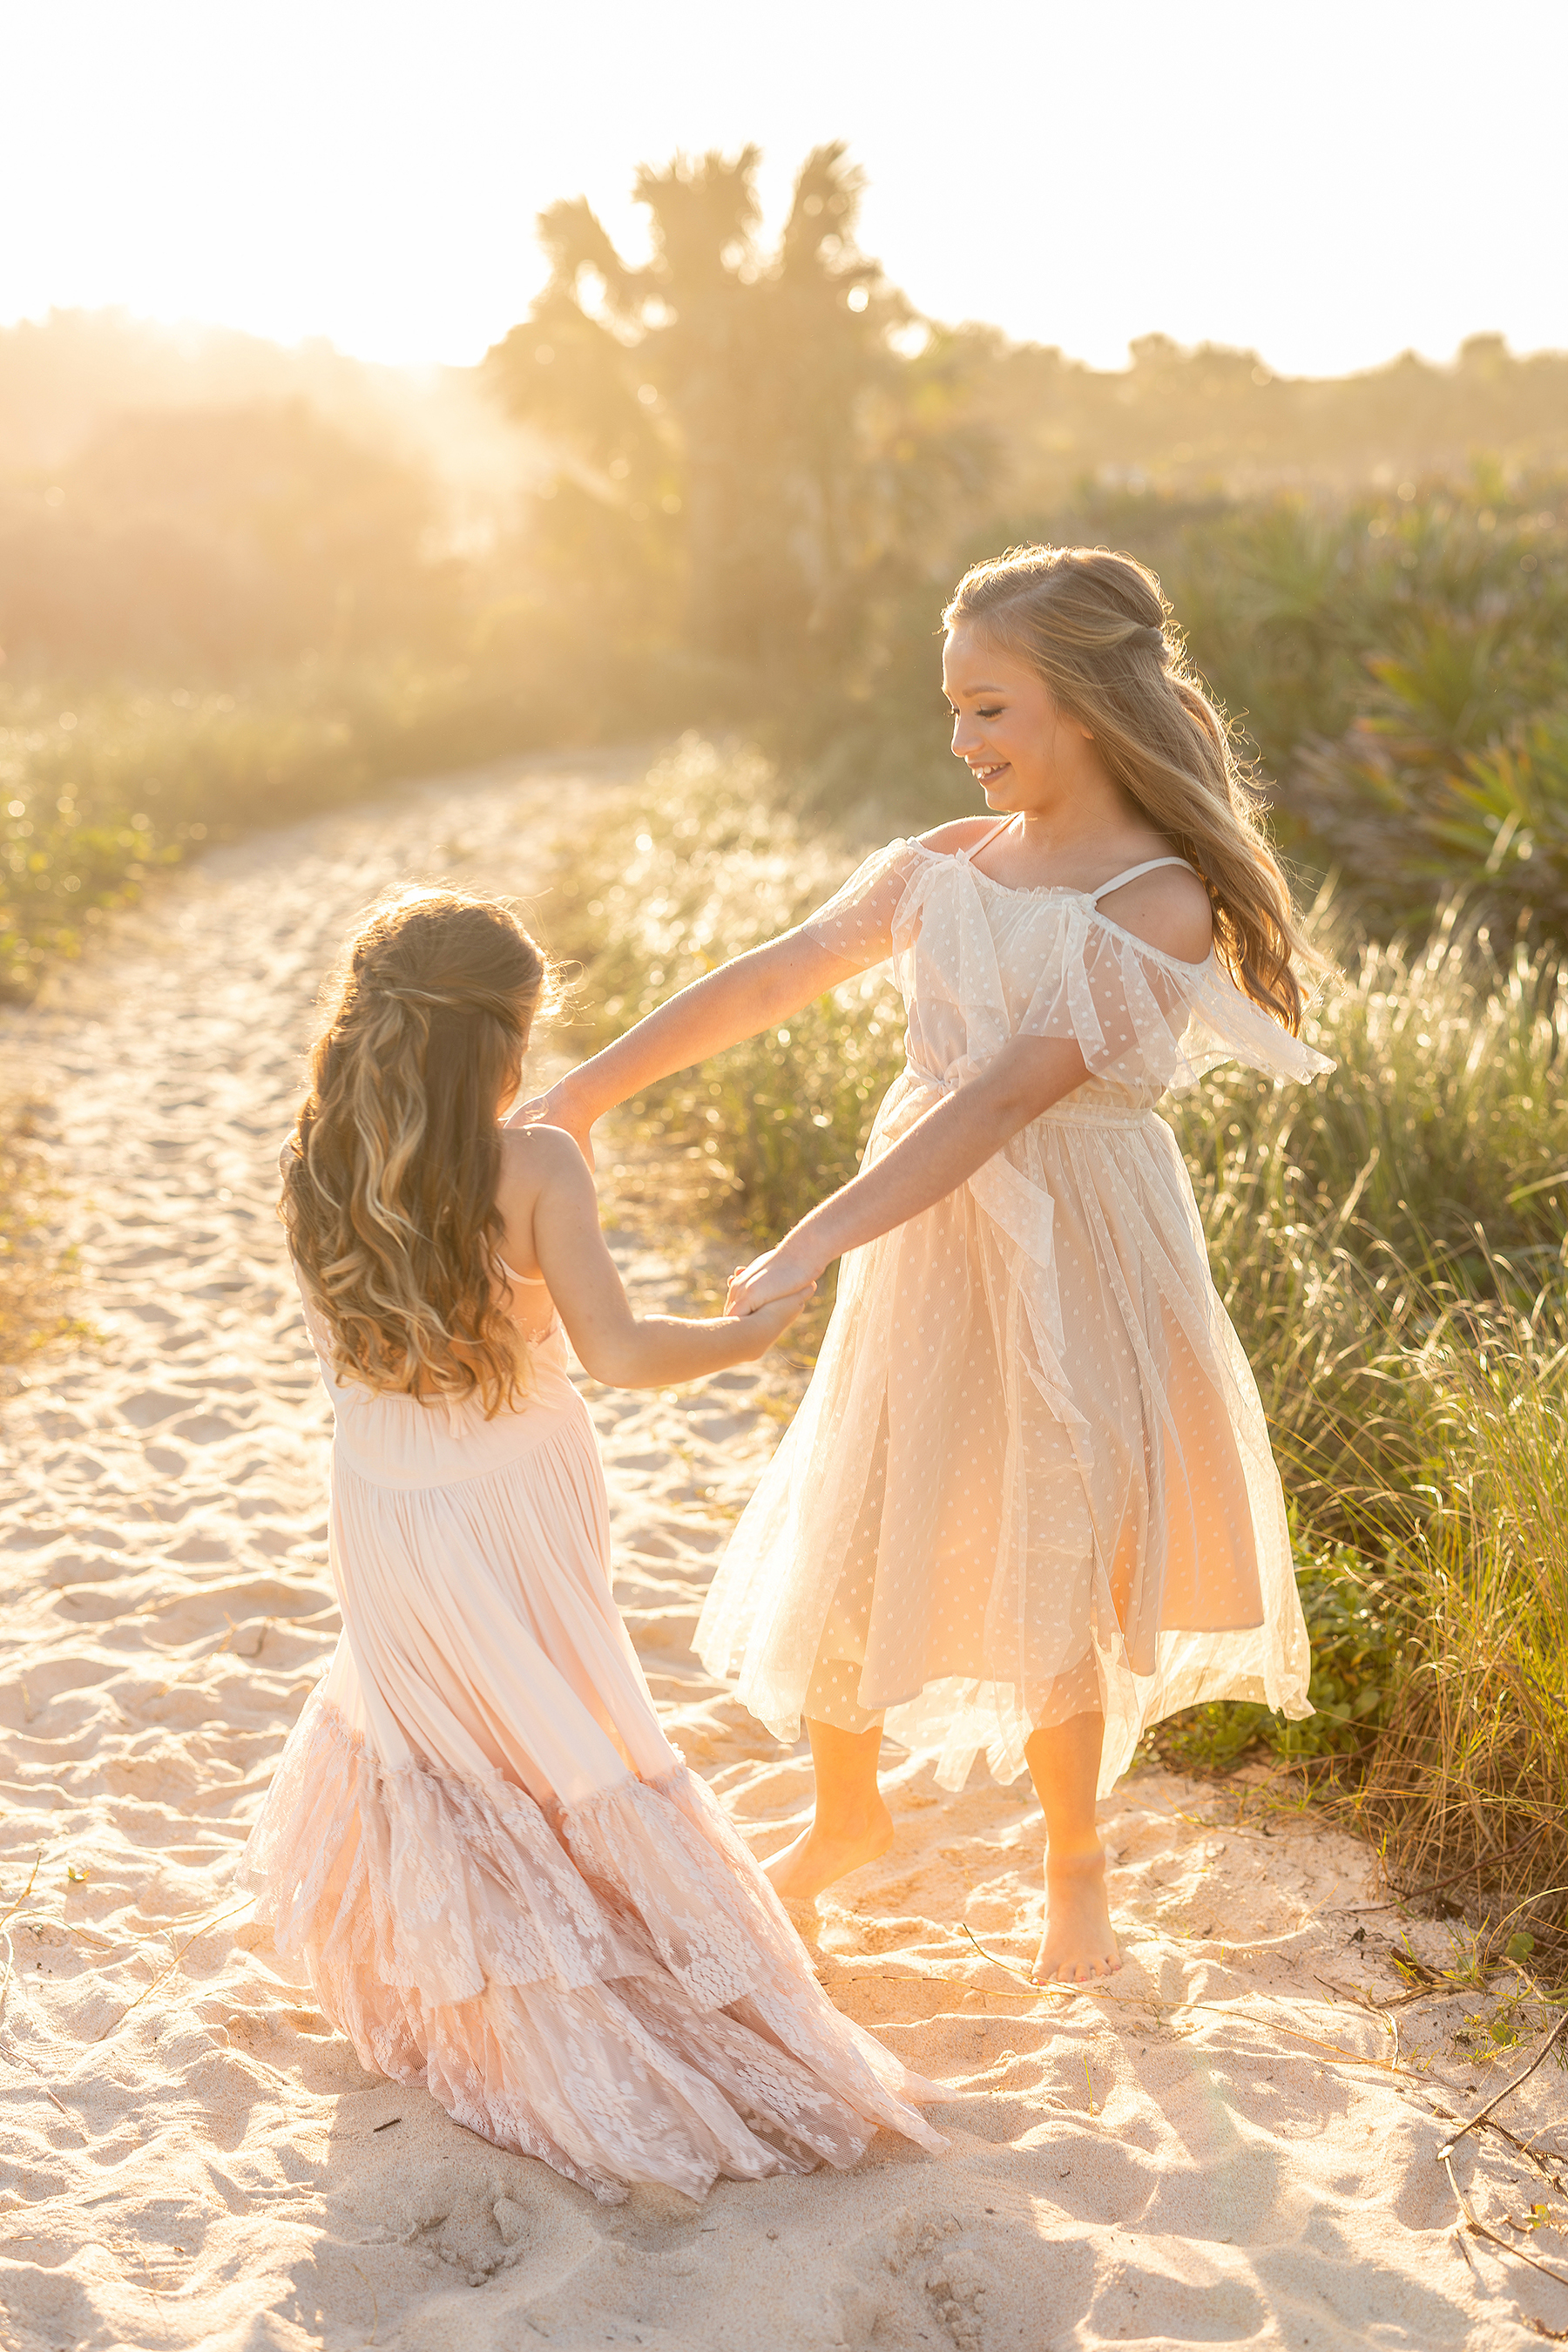 Two little girls in tulle dresses dance together at sunset on a path in the sand.